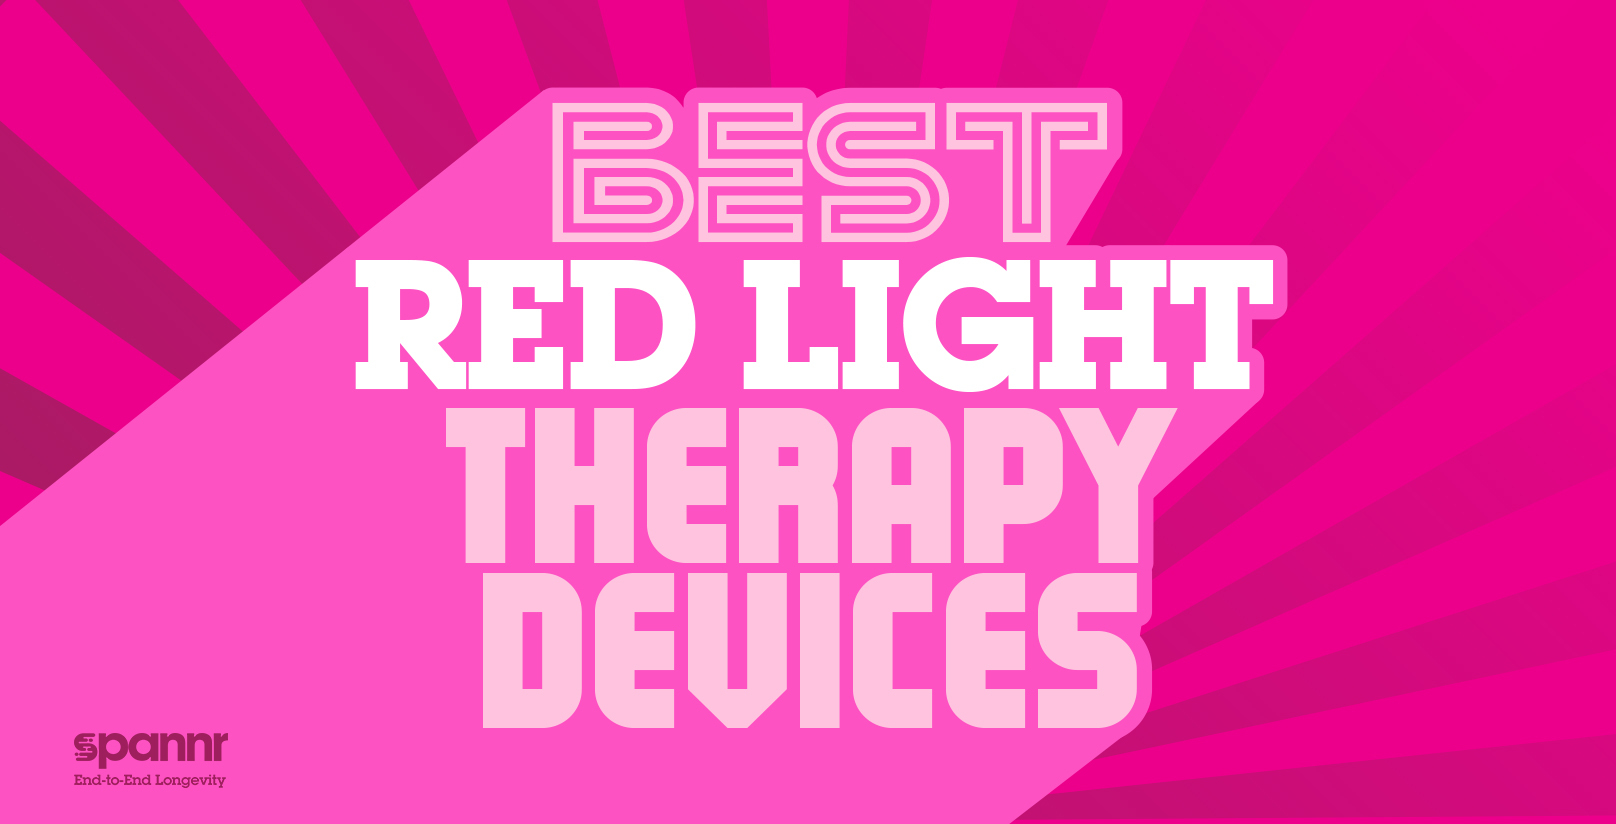 10 Best Selling Red Light Therapies For Face for 2024 - The